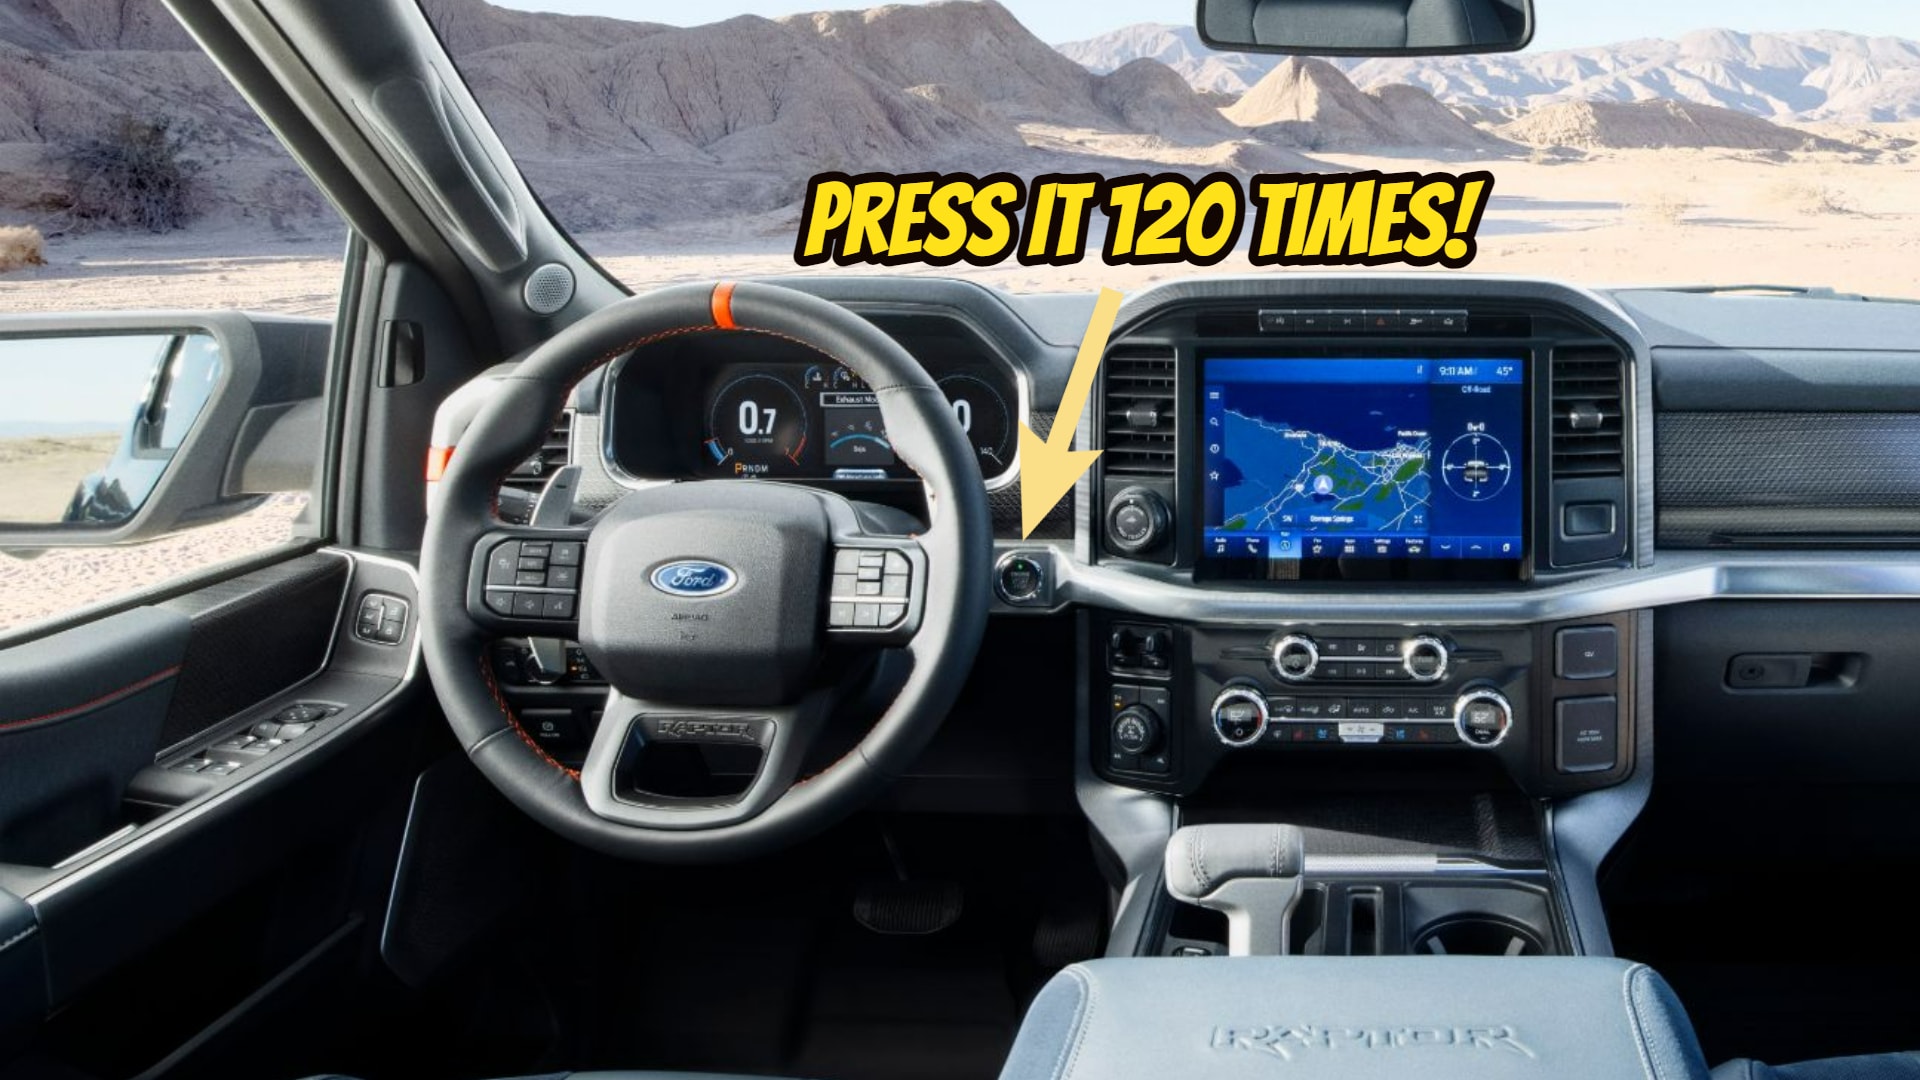 Press The Start Stop On 120 Times To Disable Factory Mode Ford Tells Technicians Autoevolution